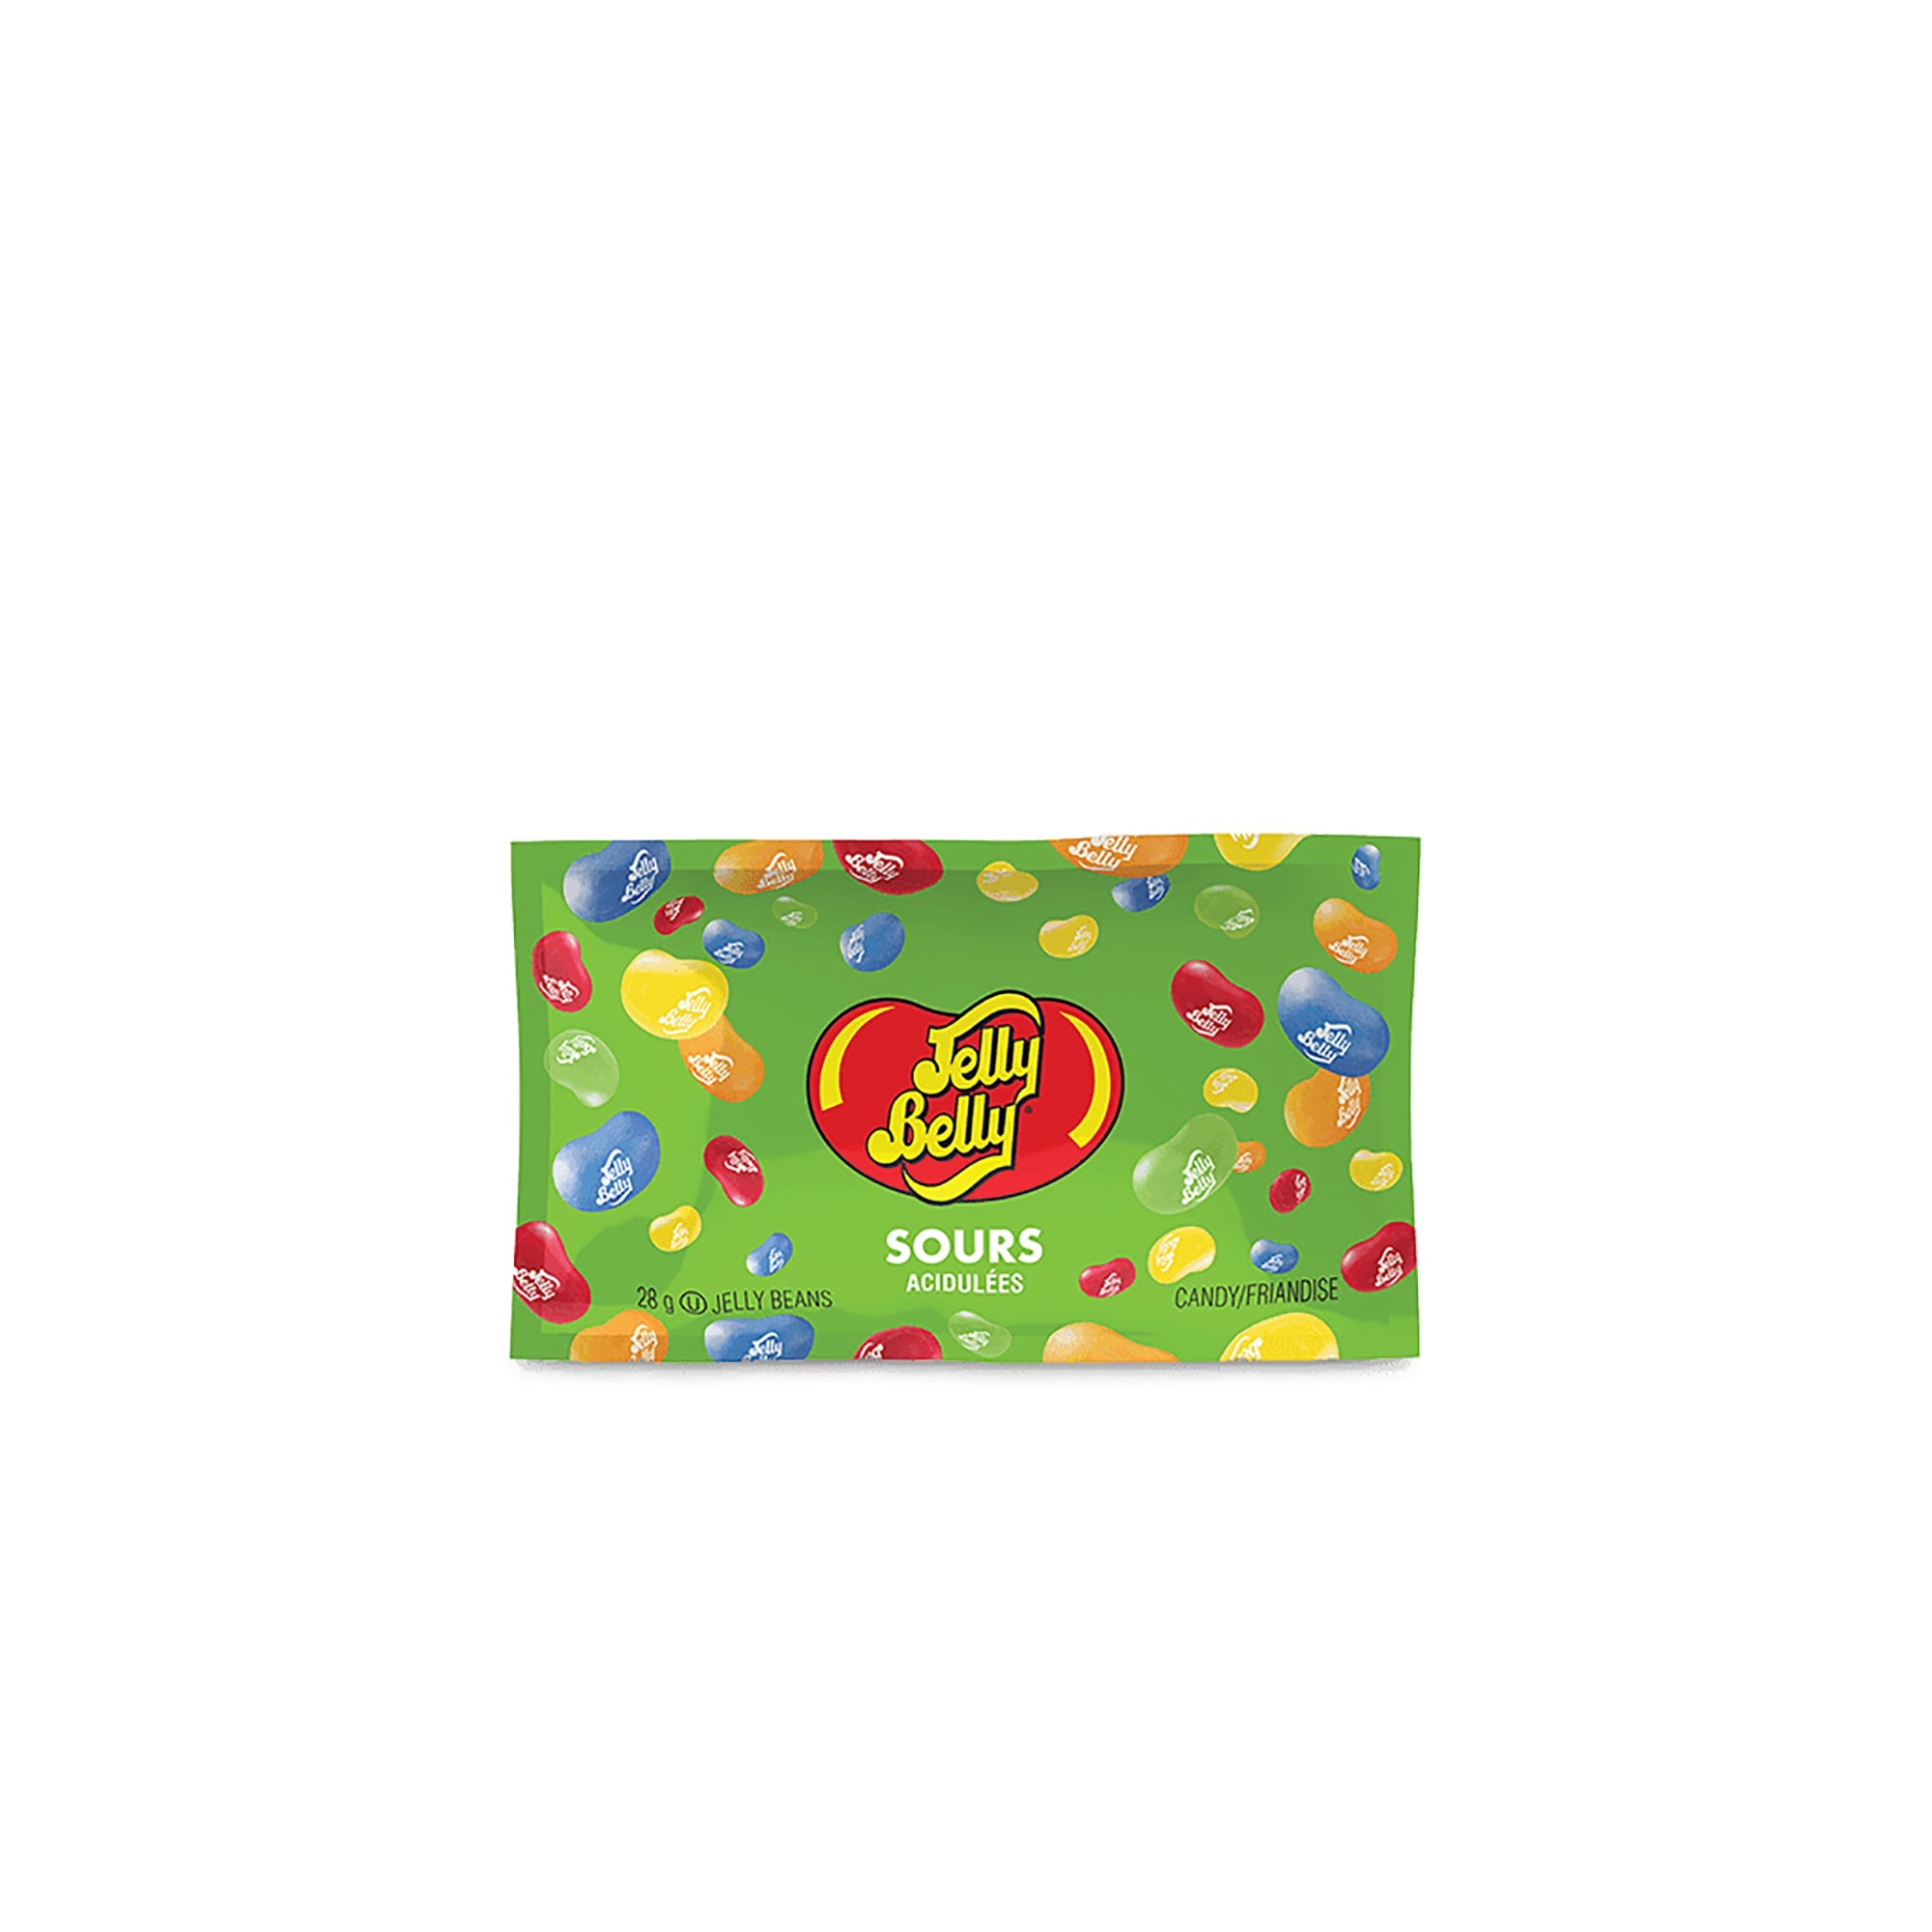 Jelly Belly Sours Jelly Bean Candy 28g